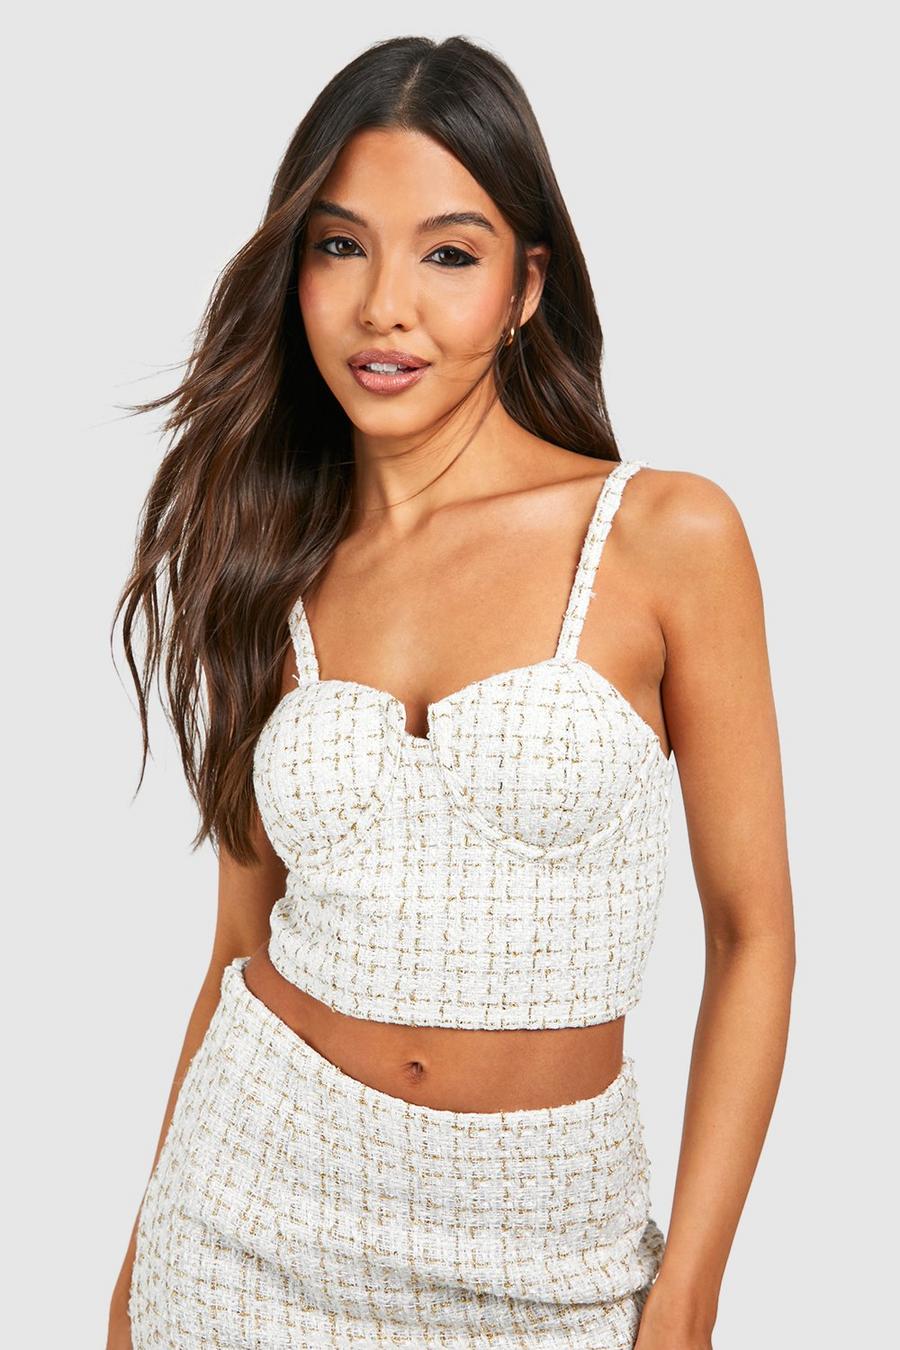 Boohoo Crepe Bralette Cropped White Size 8